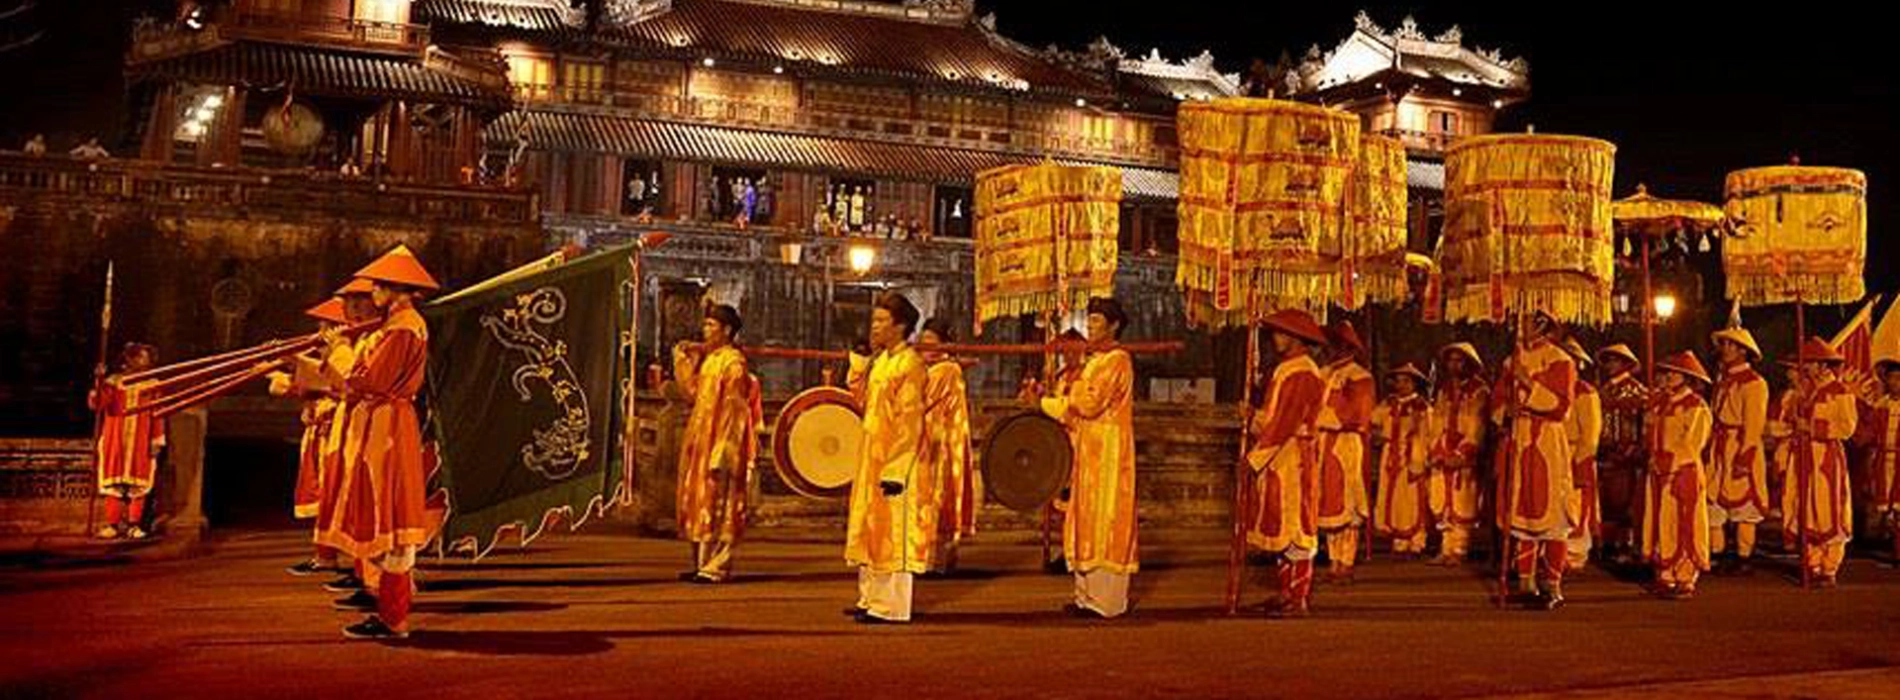 Listing Vietnam's UNESCO-recognised intangible cultural heritage